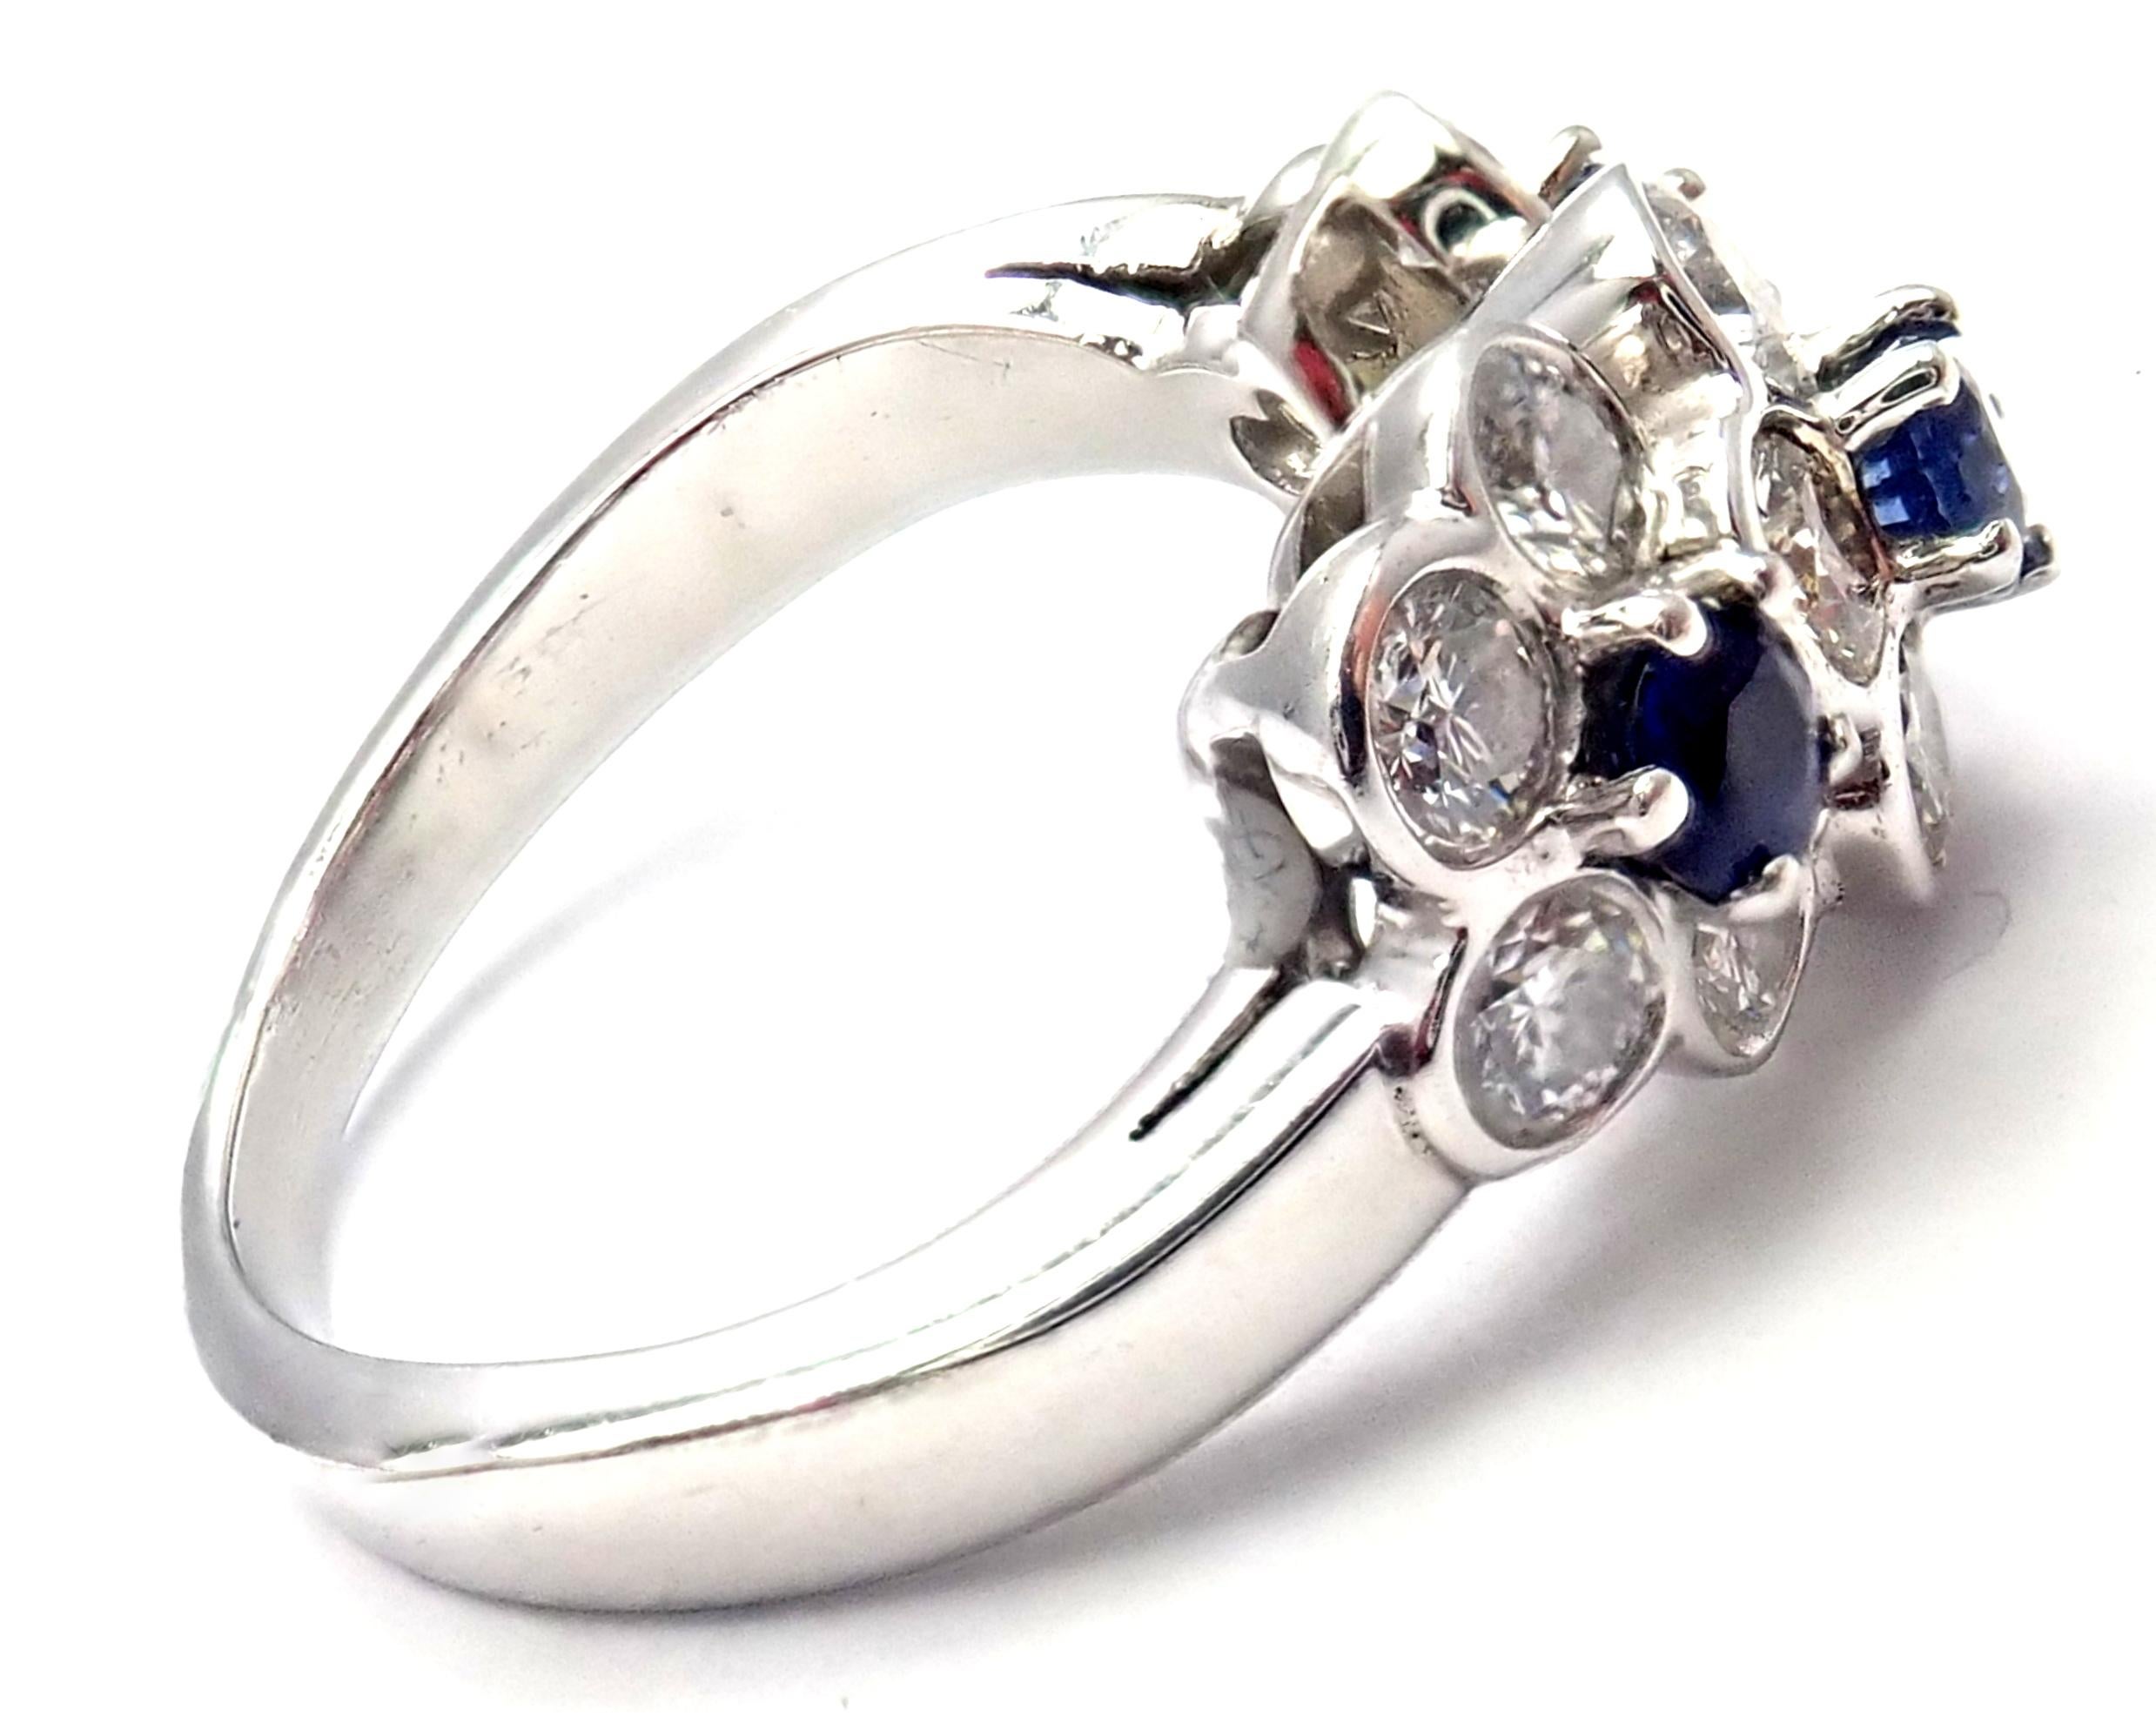 Platinum Diamond & Sapphire Fleurette Flower Ring by Van Cleef & Arpels. 
With 13 round brilliant cut diamond VVS1 clarity, E color total weight approx. .65ct
3 round sapphires total weight approx. .30ct
Details:
Size: 4
Width: 9.5mm
Weight: 7